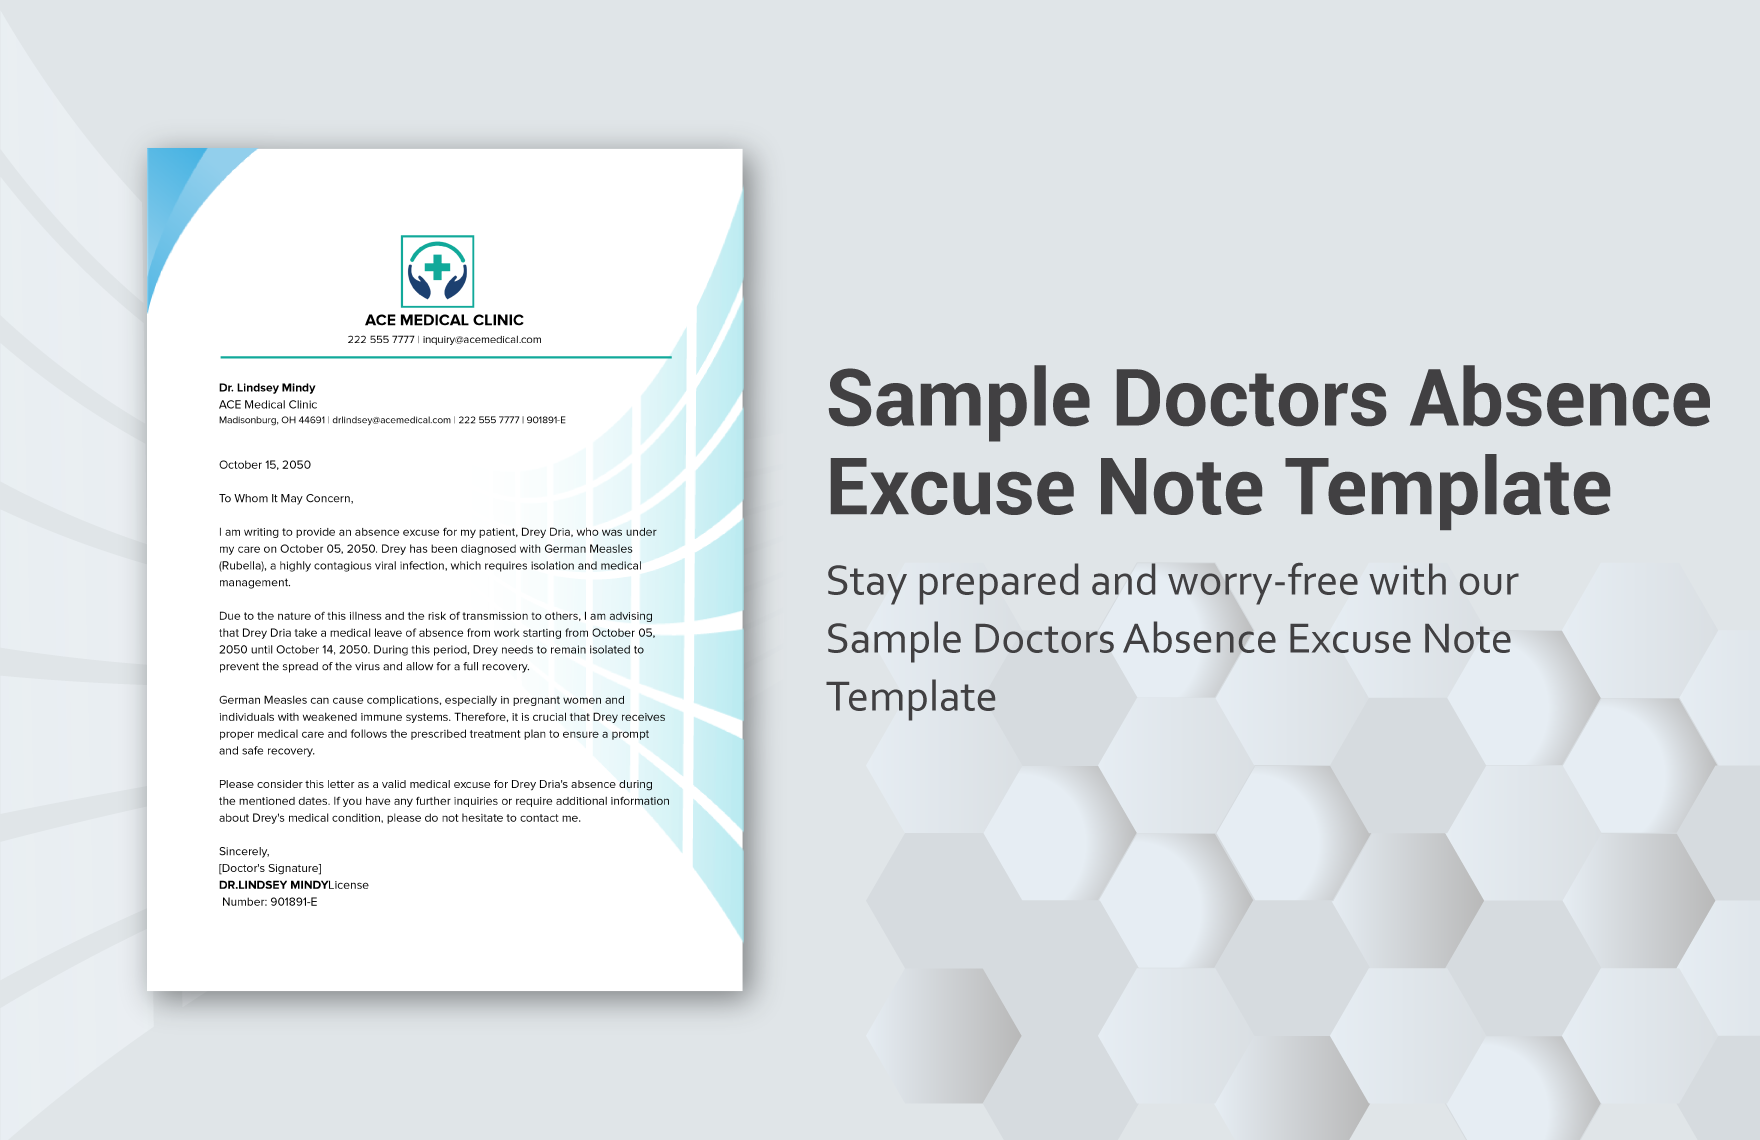 Sample Doctors Absence Excuse Note Template